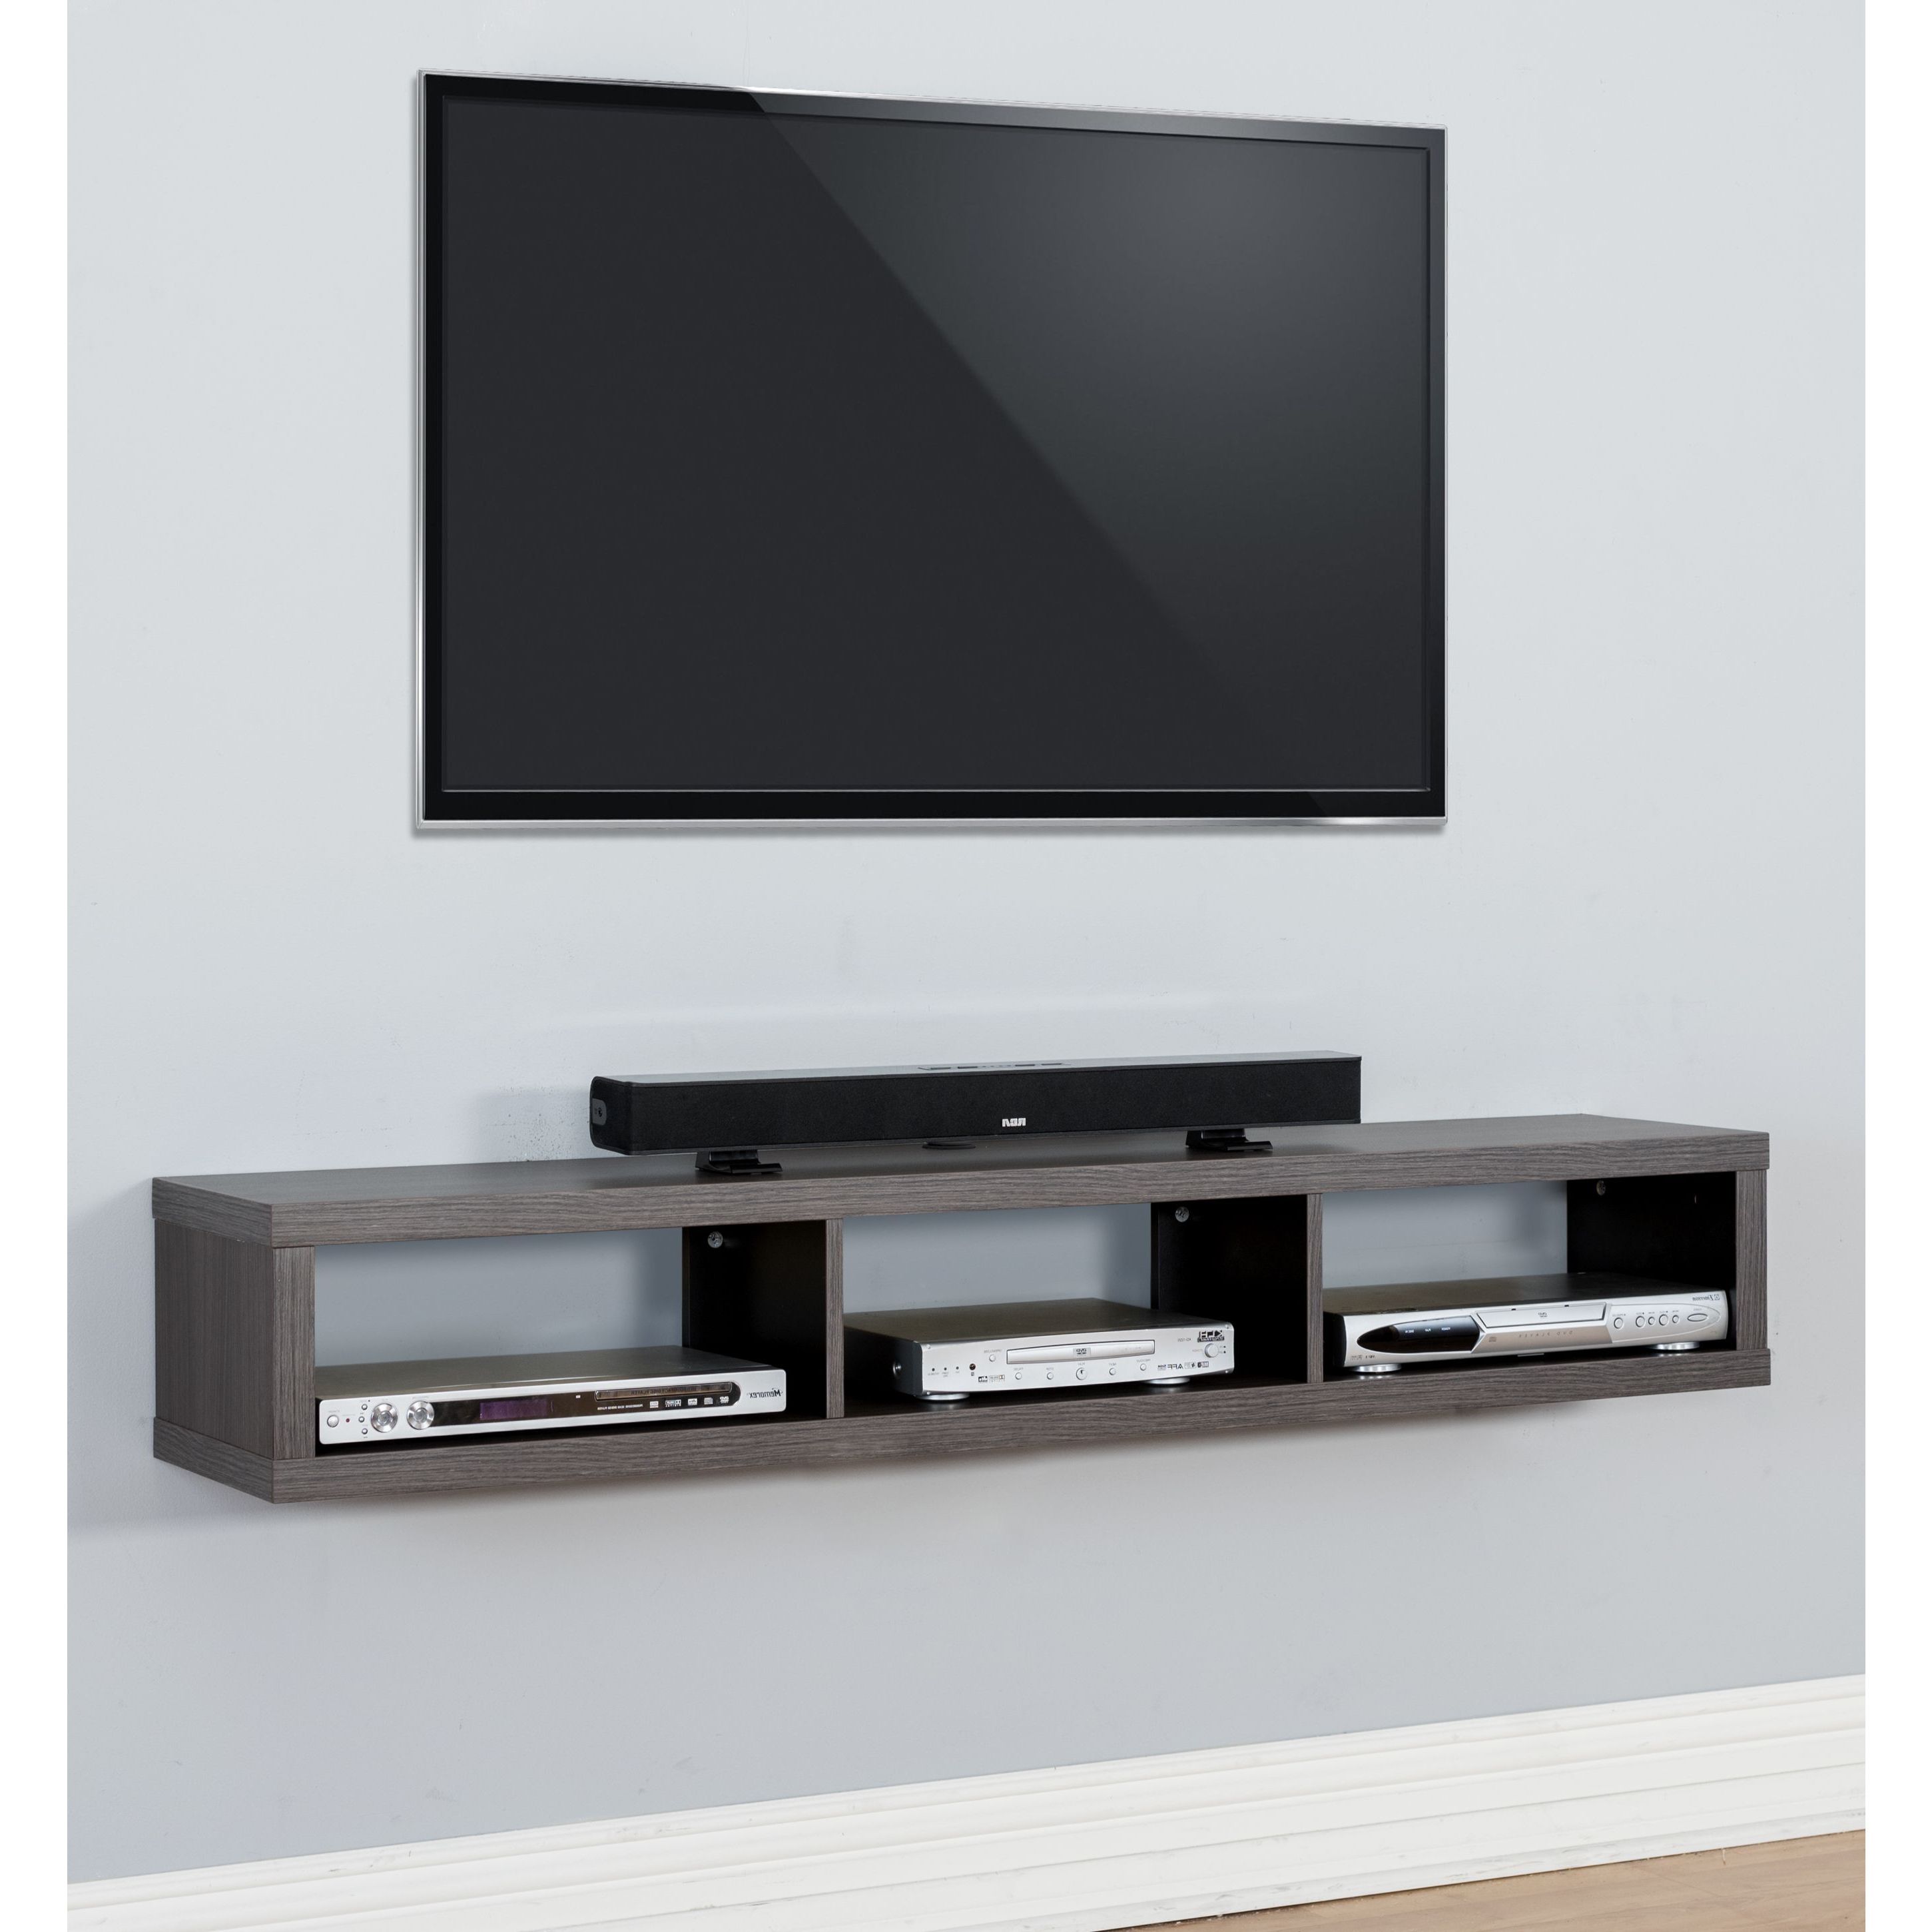 Wall Mounted Tv Pertaining To Wall Mounted Tv Racks (View 11 of 20)